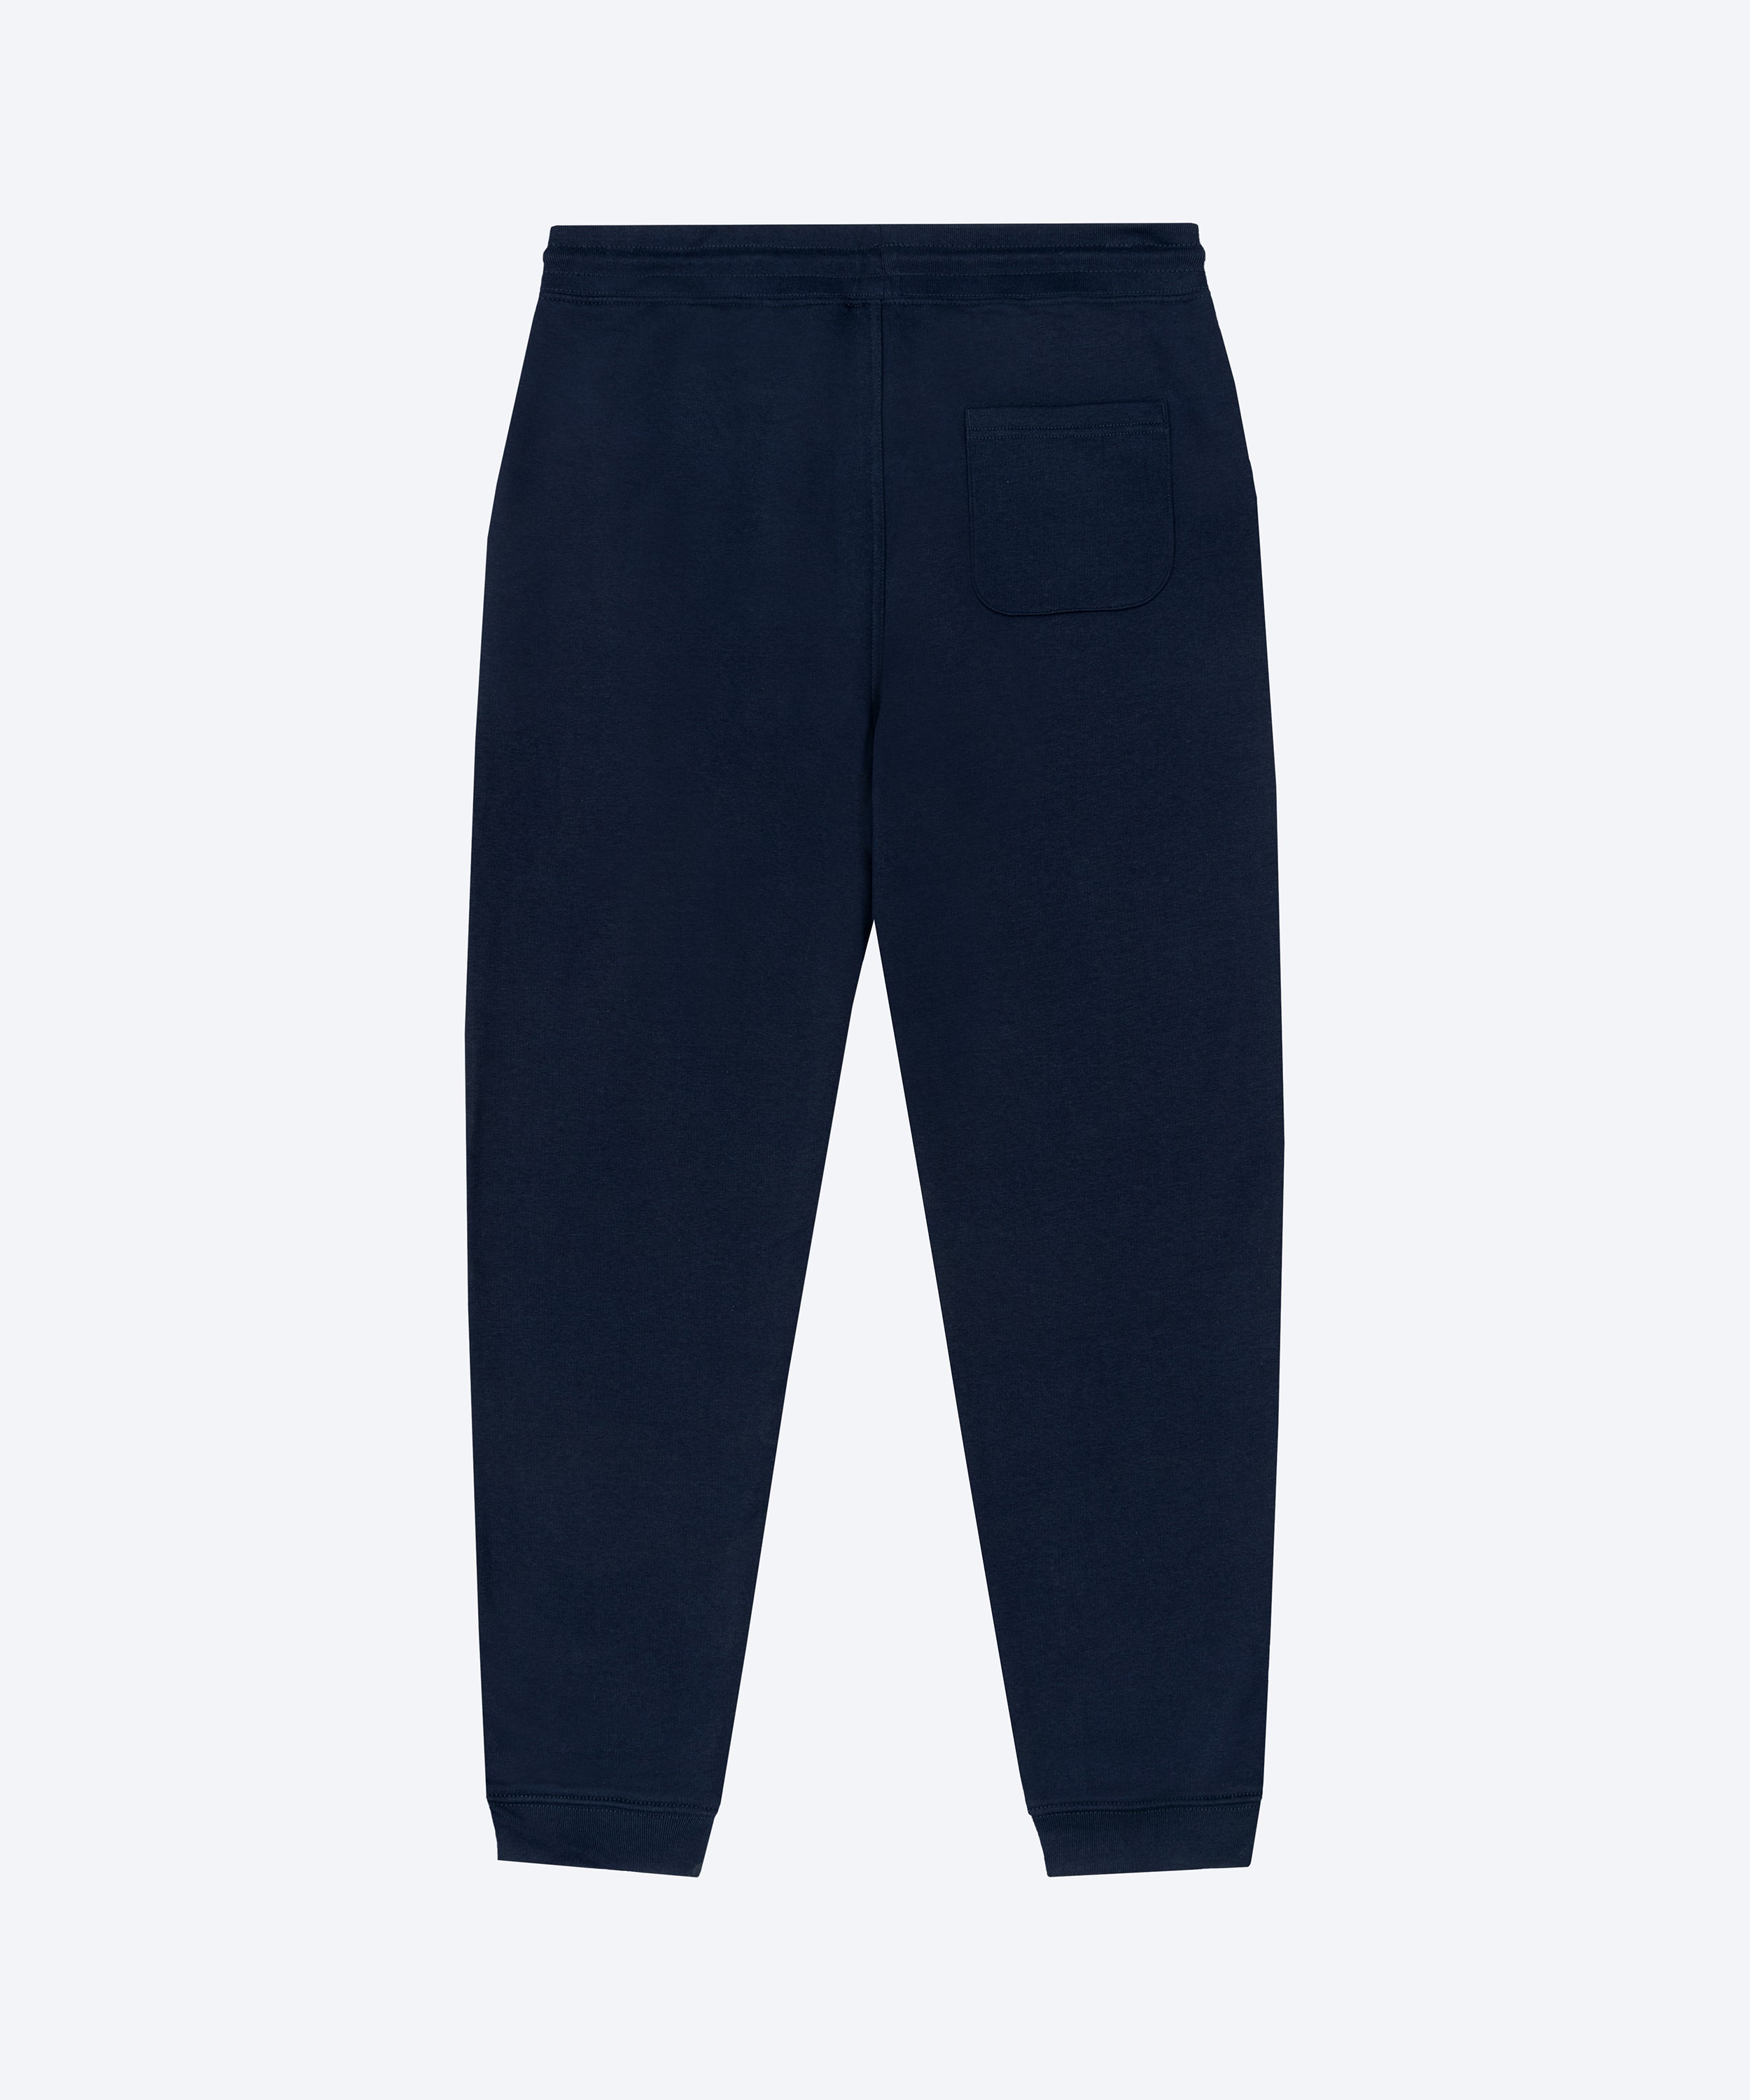 THE LIVE IT! JOGGER (NAVY / WHITE)